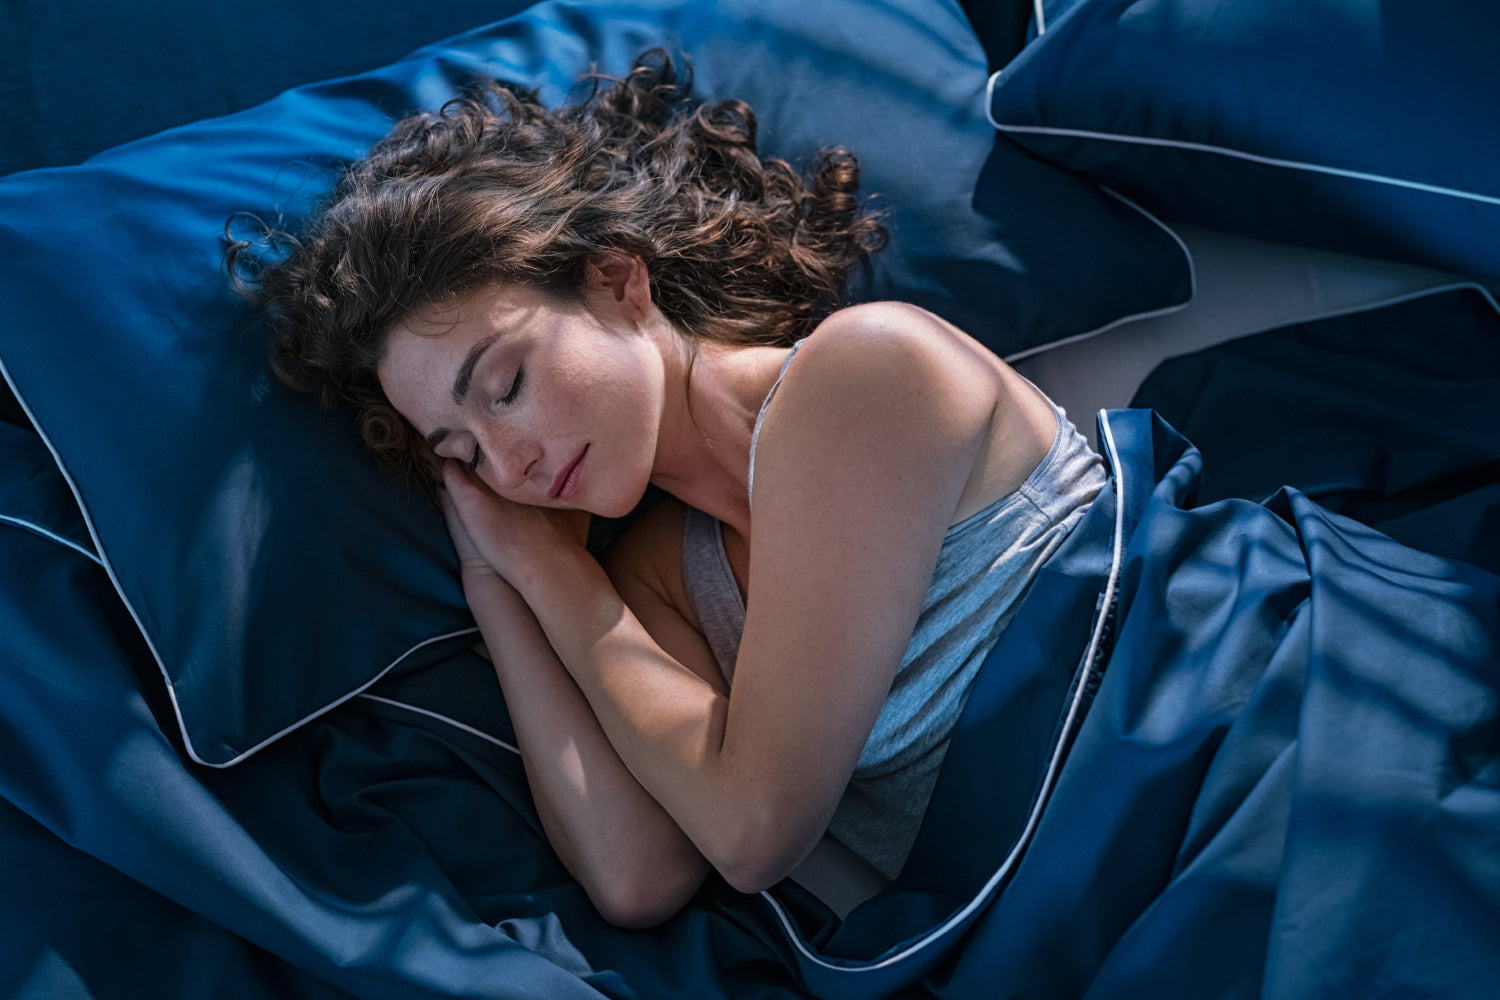 Can't Sleep During Period: 10 Tips To Sleep Better